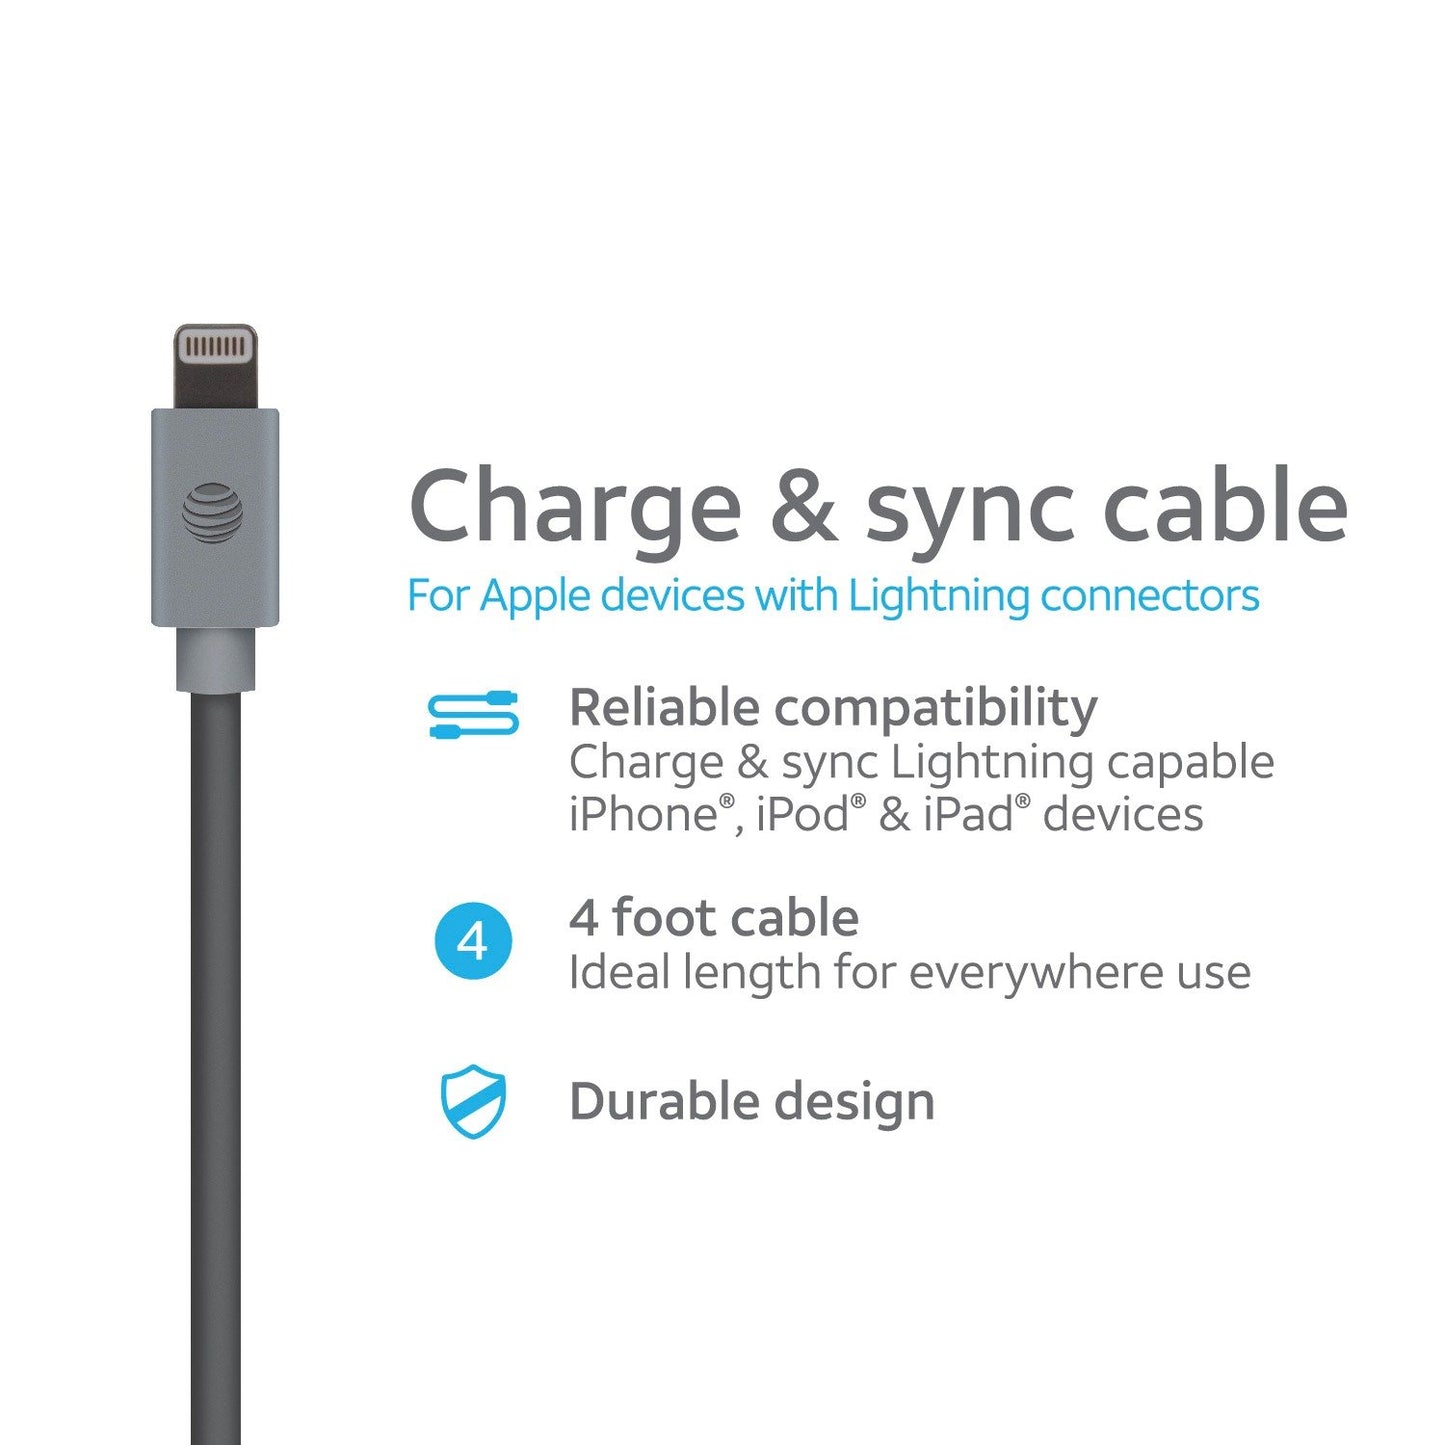 AT&T PVLC1-GRY 4-Foot PVC Charge and Sync Lightning Cable (Gray)